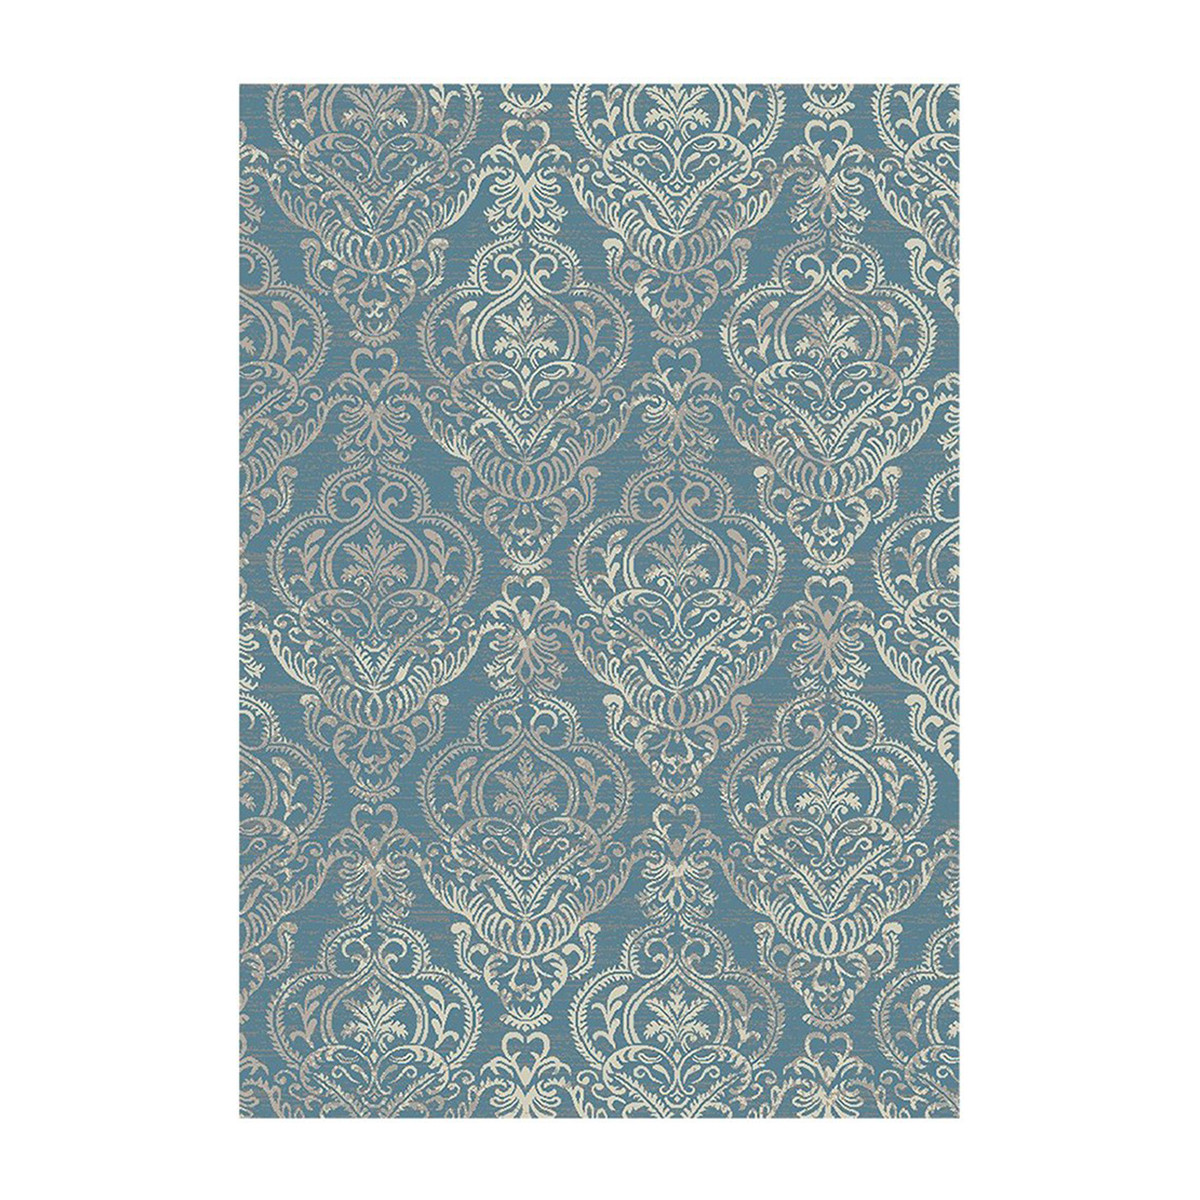 5' x 8' Blue and Beige Damask Distressed Area Rug-552166-1